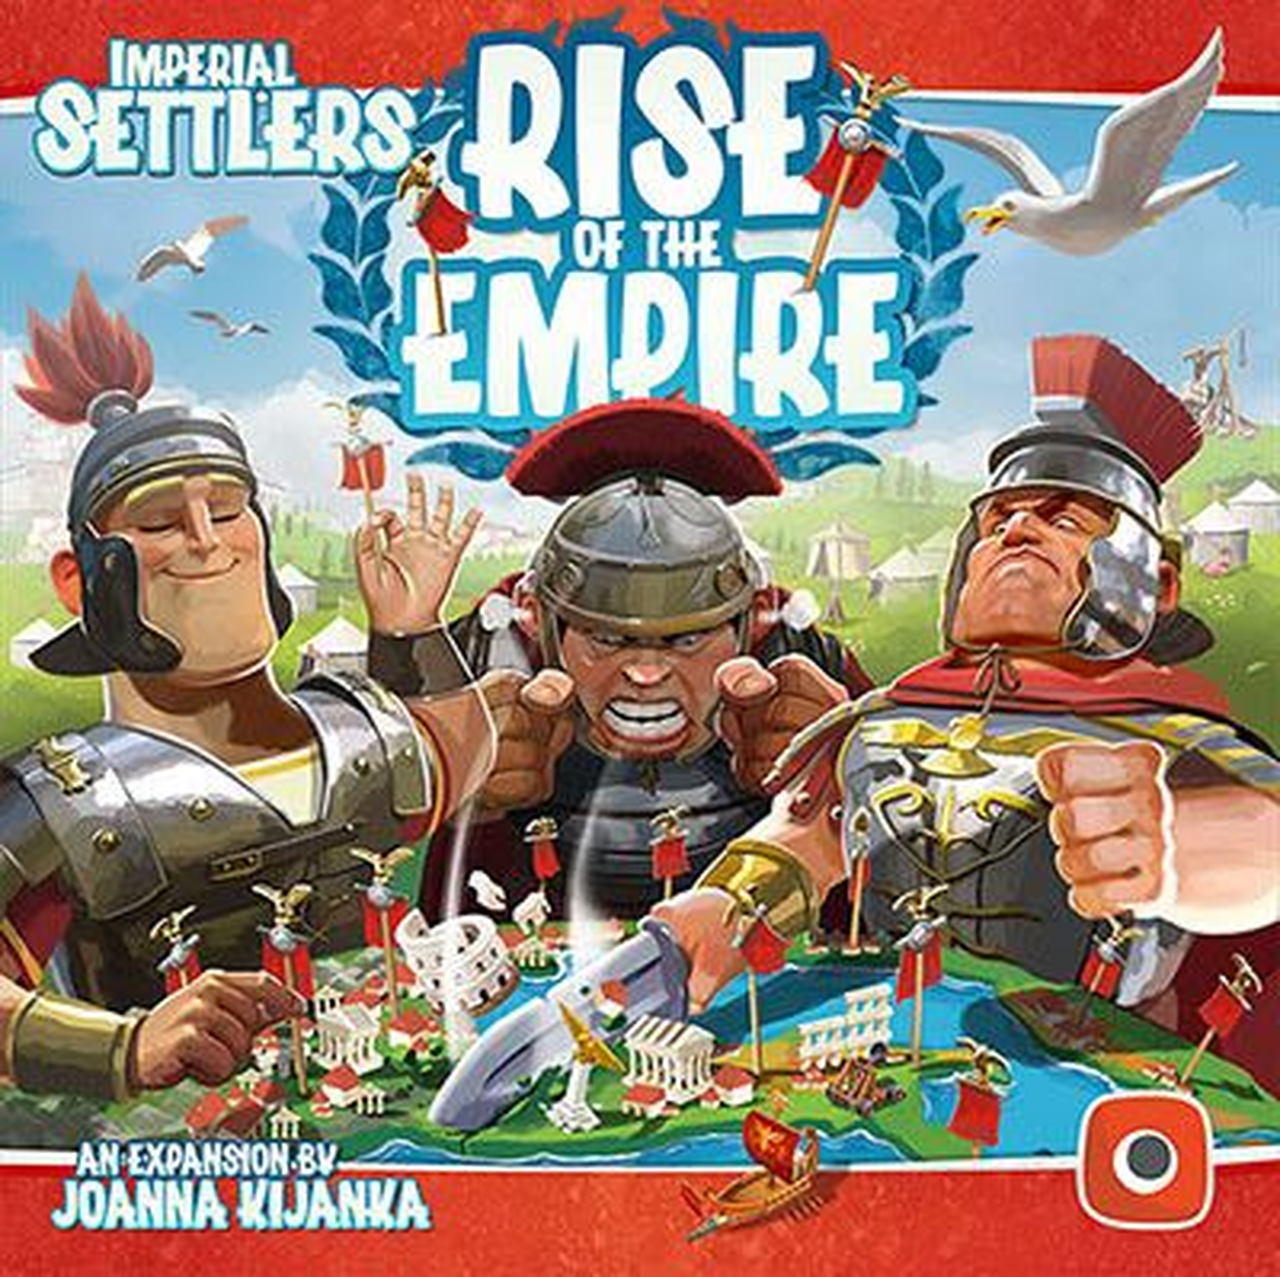 Imperial Settlers - Rise of the Empire Expansion